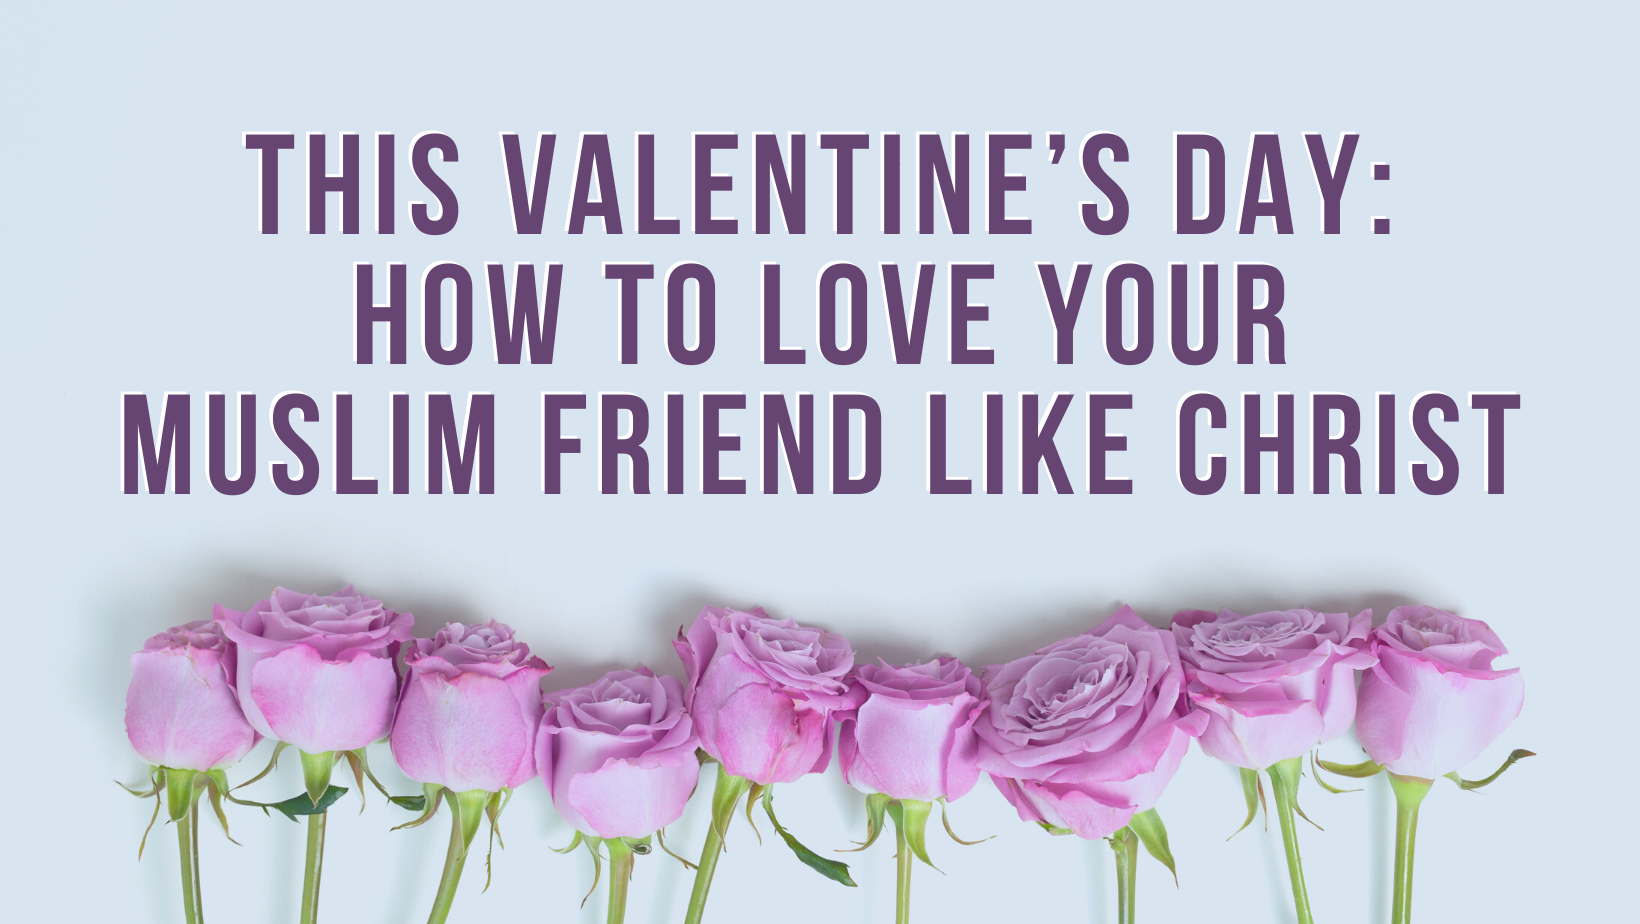 This Valentine’s Day: How to love your Muslim friend like Christ